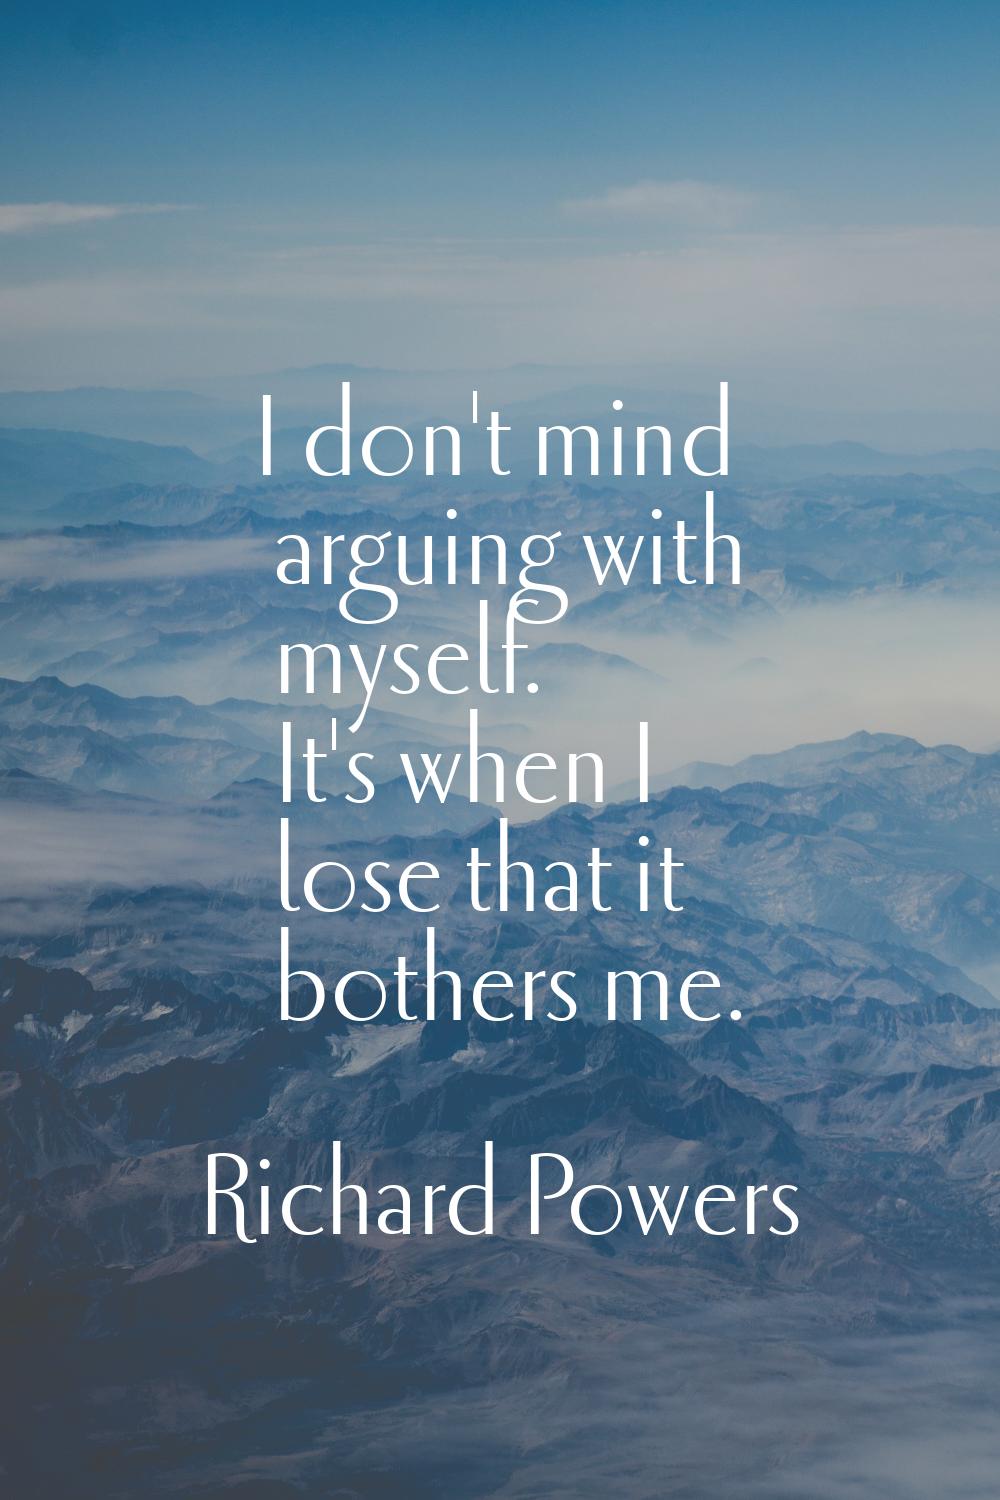 I don't mind arguing with myself. It's when I lose that it bothers me.